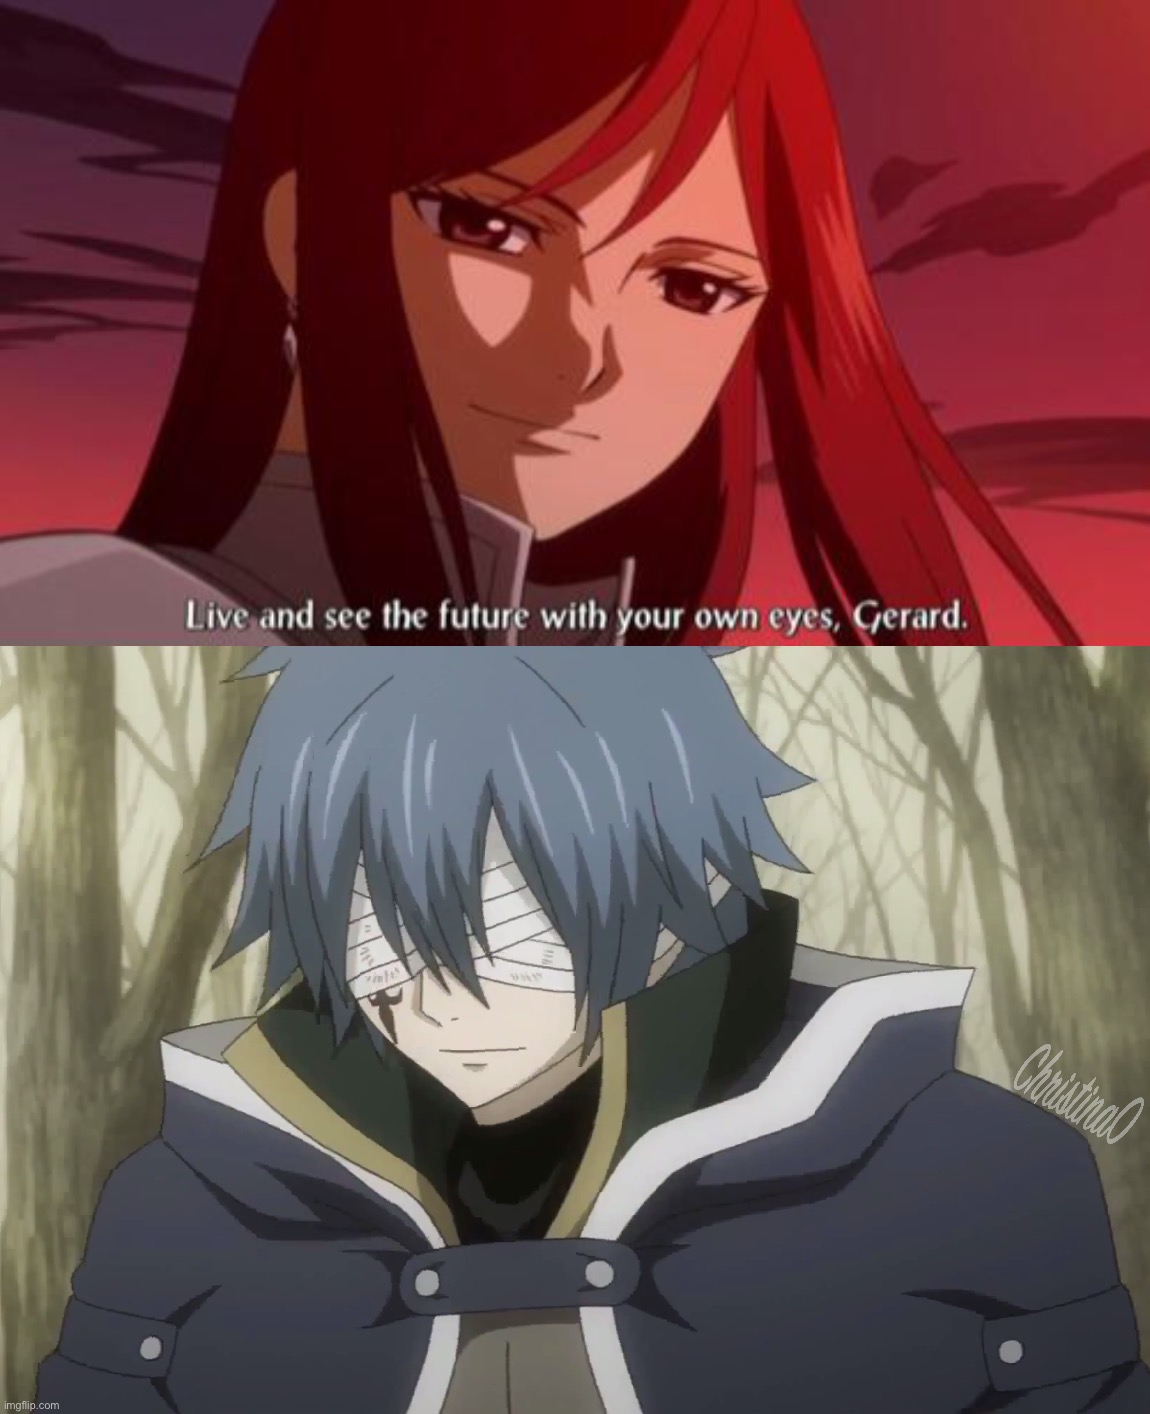 Blind Jellal - Fairy Tail Meme | image tagged in memes,anime meme,fairy tail,fairy tail meme,jellal fairy tail,depression sadness hurt pain anxiety | made w/ Imgflip meme maker